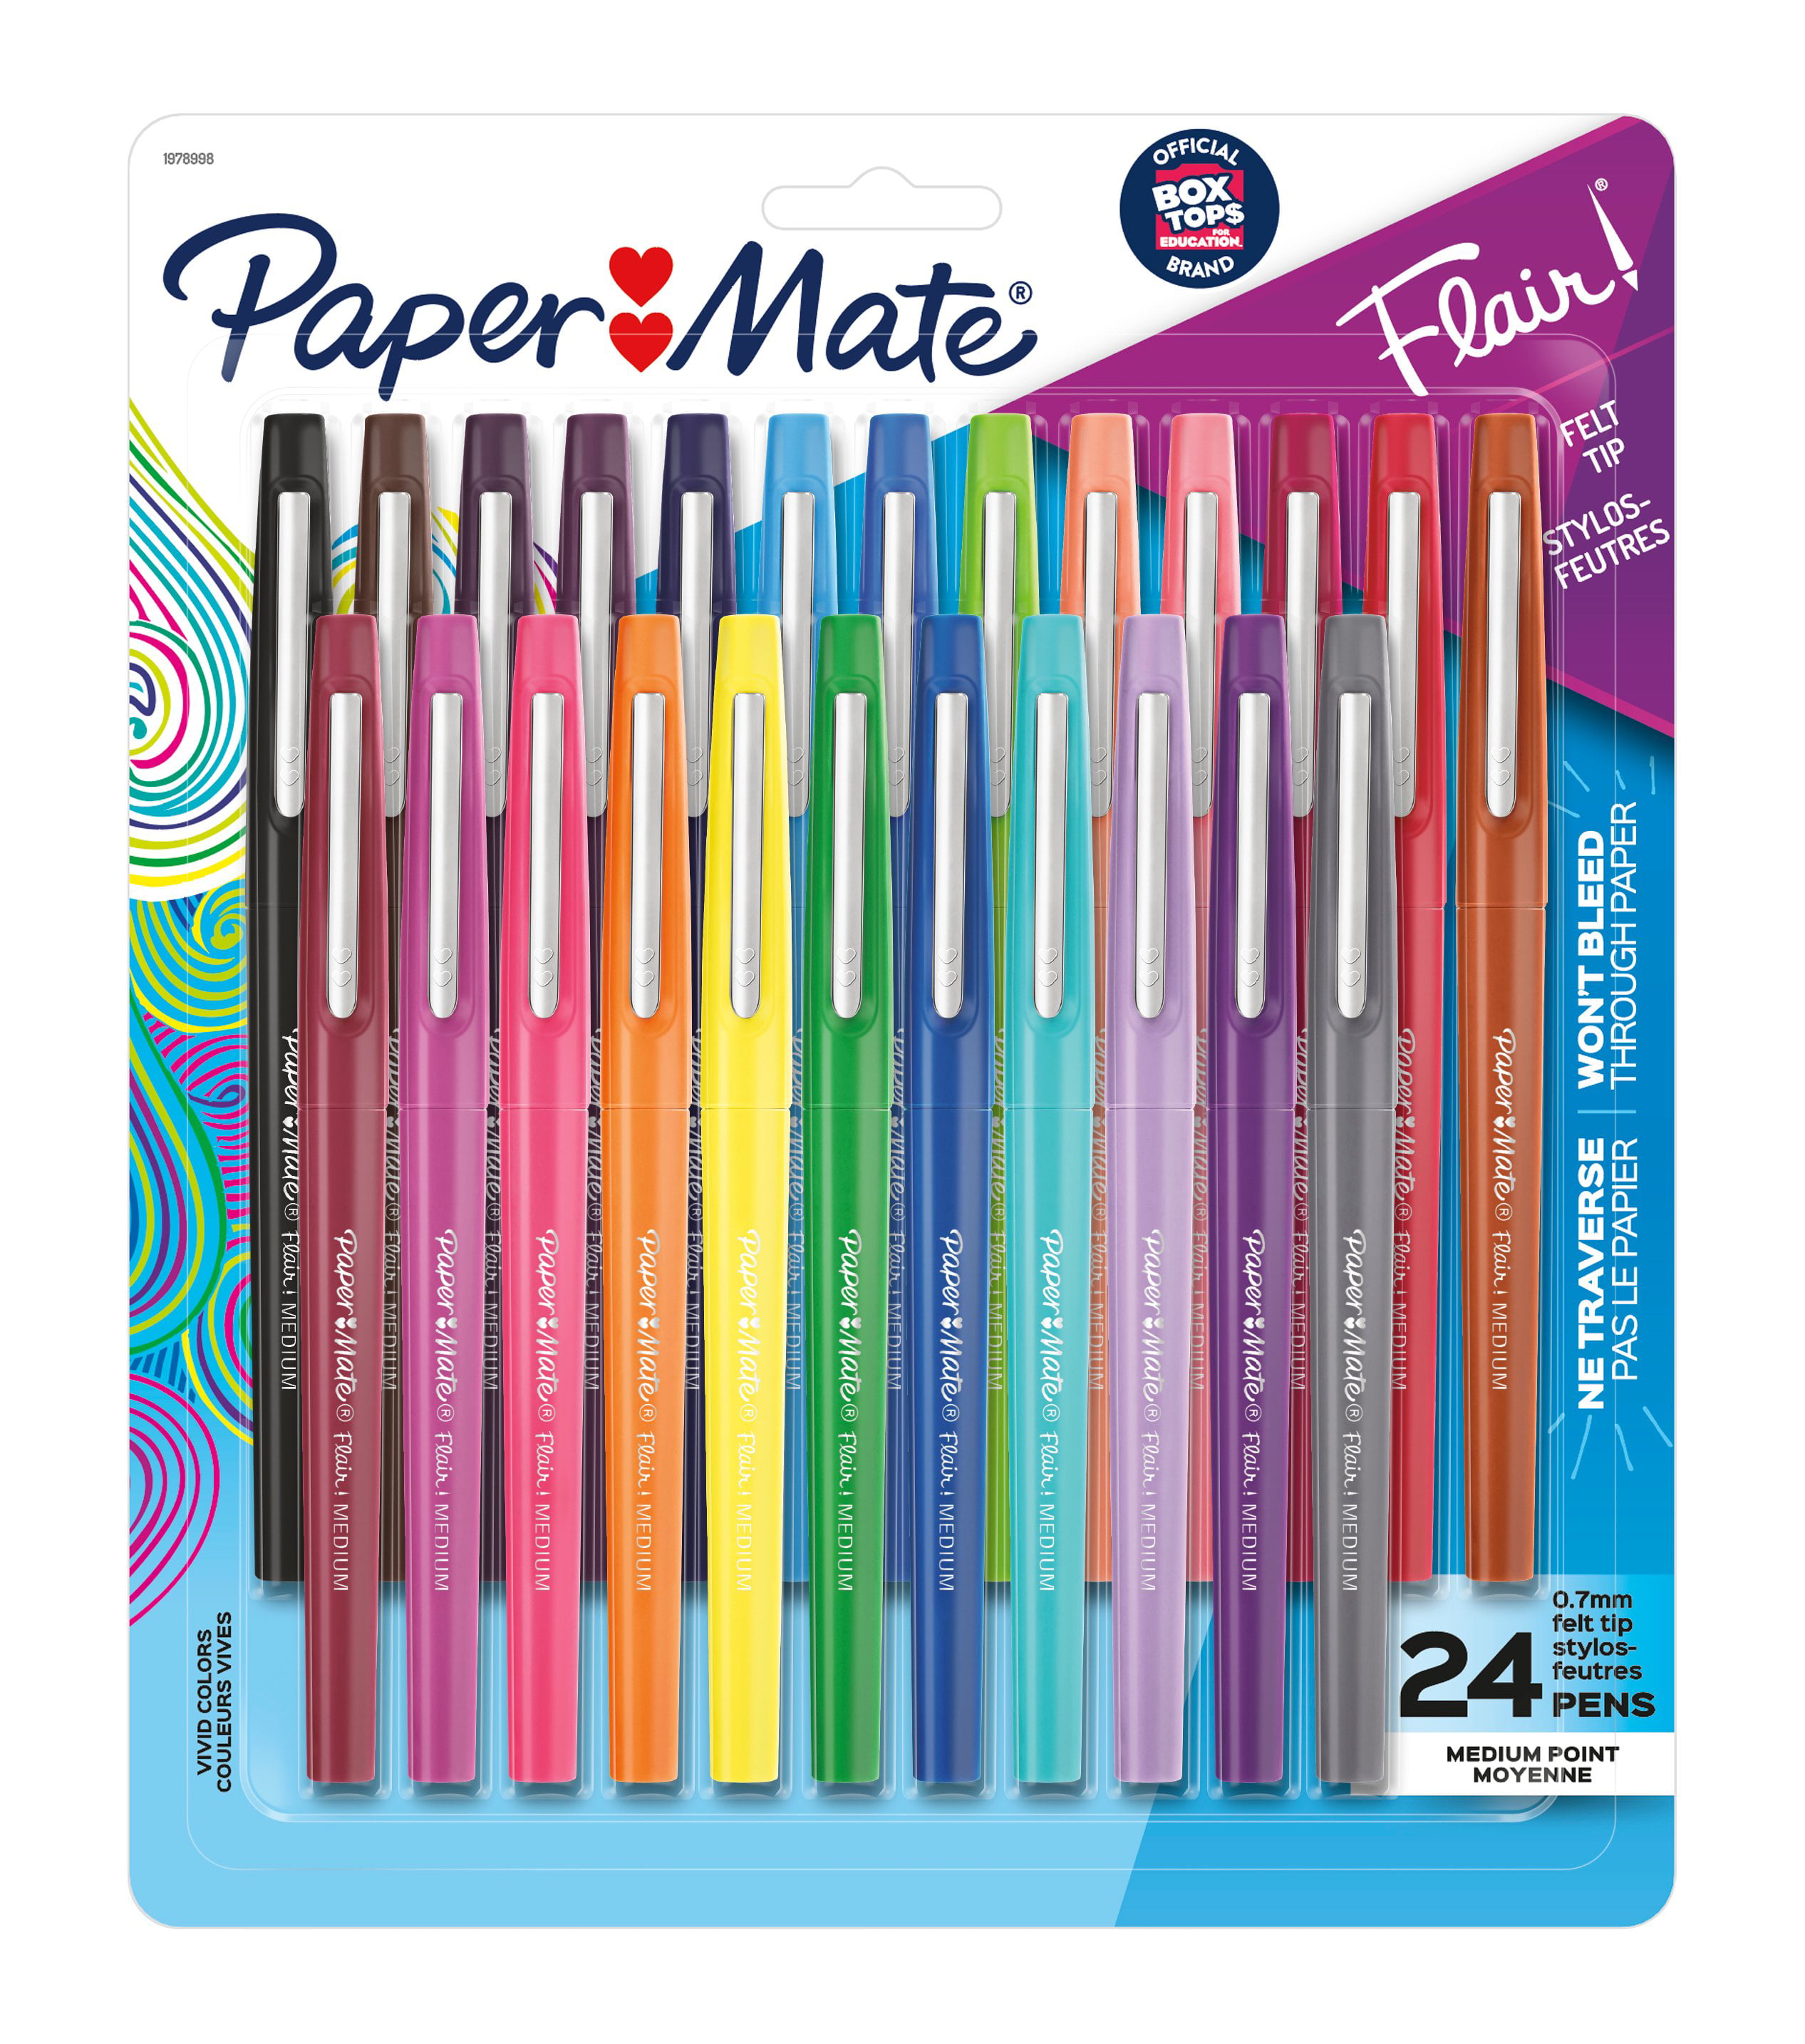 1 Medium Point 0.7 mm Limited Edition Candy Pop Pack Marker Pens 24 Count Flair Felt Tip Pens 